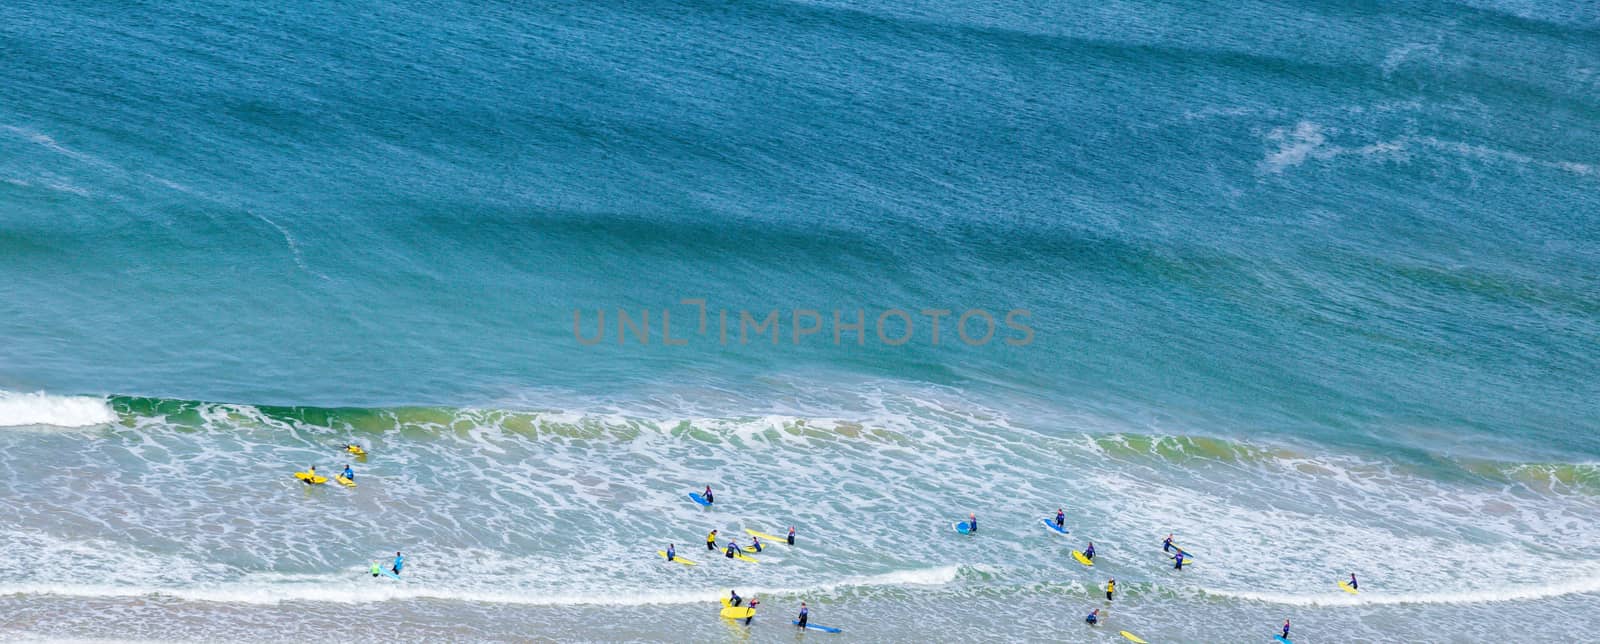 Surfers in the waves off Mawgan Porth Beach, Cornwall, UK by magicbones